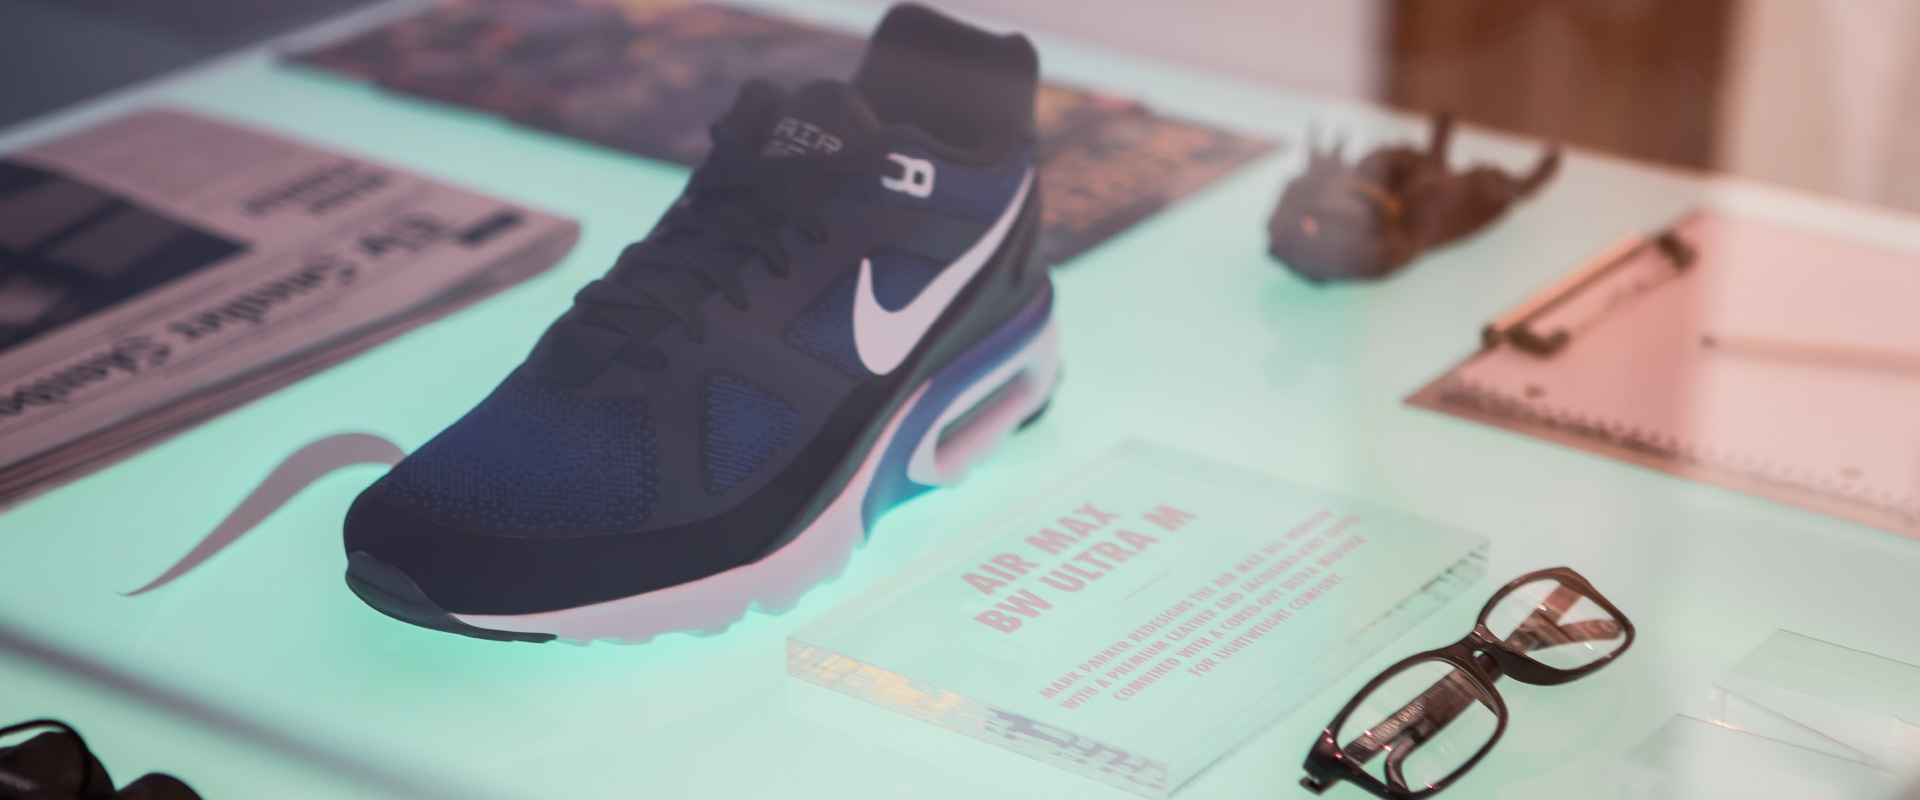 Retail Environment Design for Nike Air Max Day - Central Station